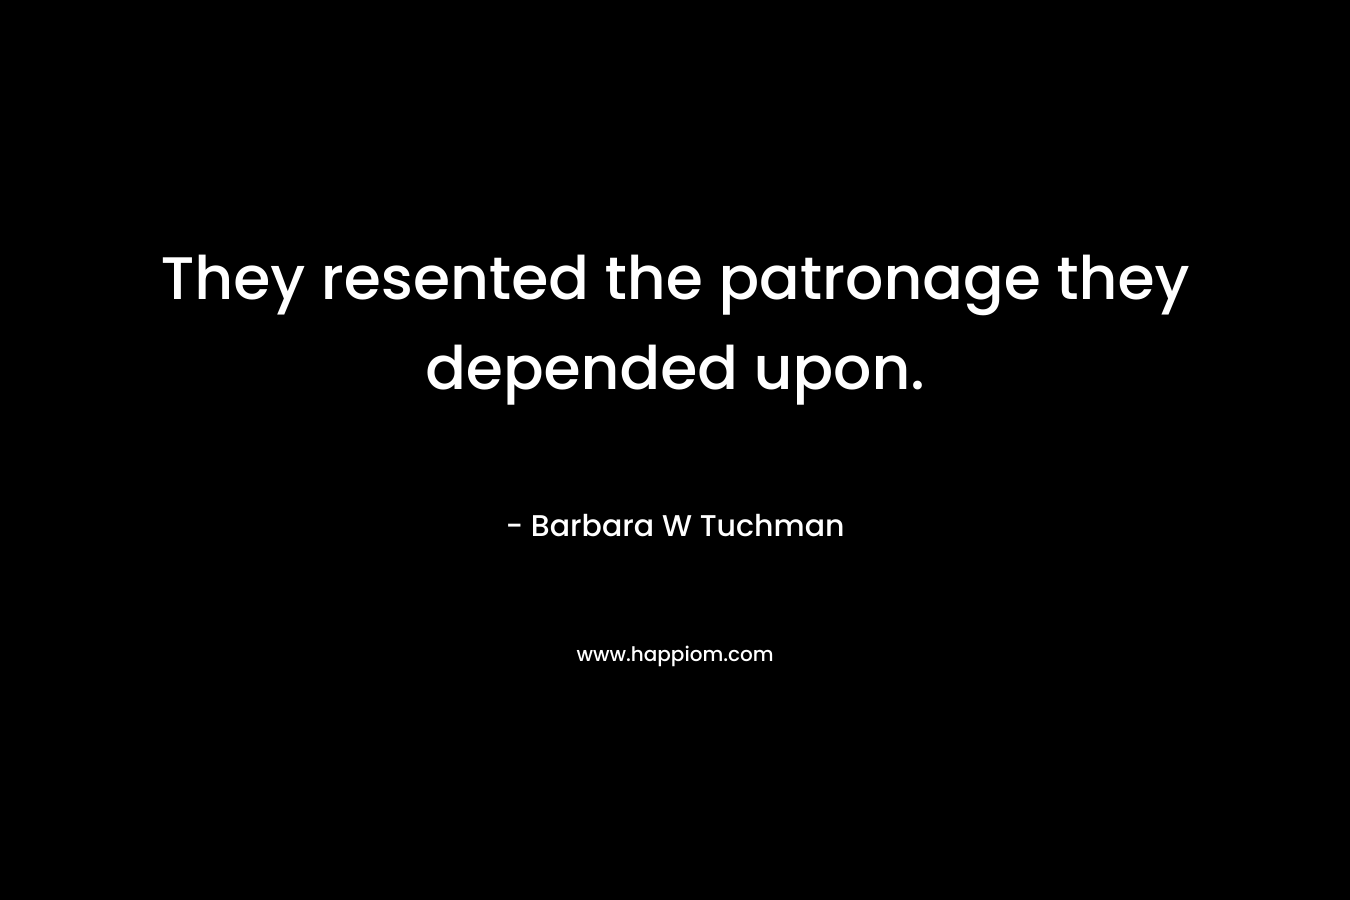 They resented the patronage they depended upon. – Barbara W Tuchman